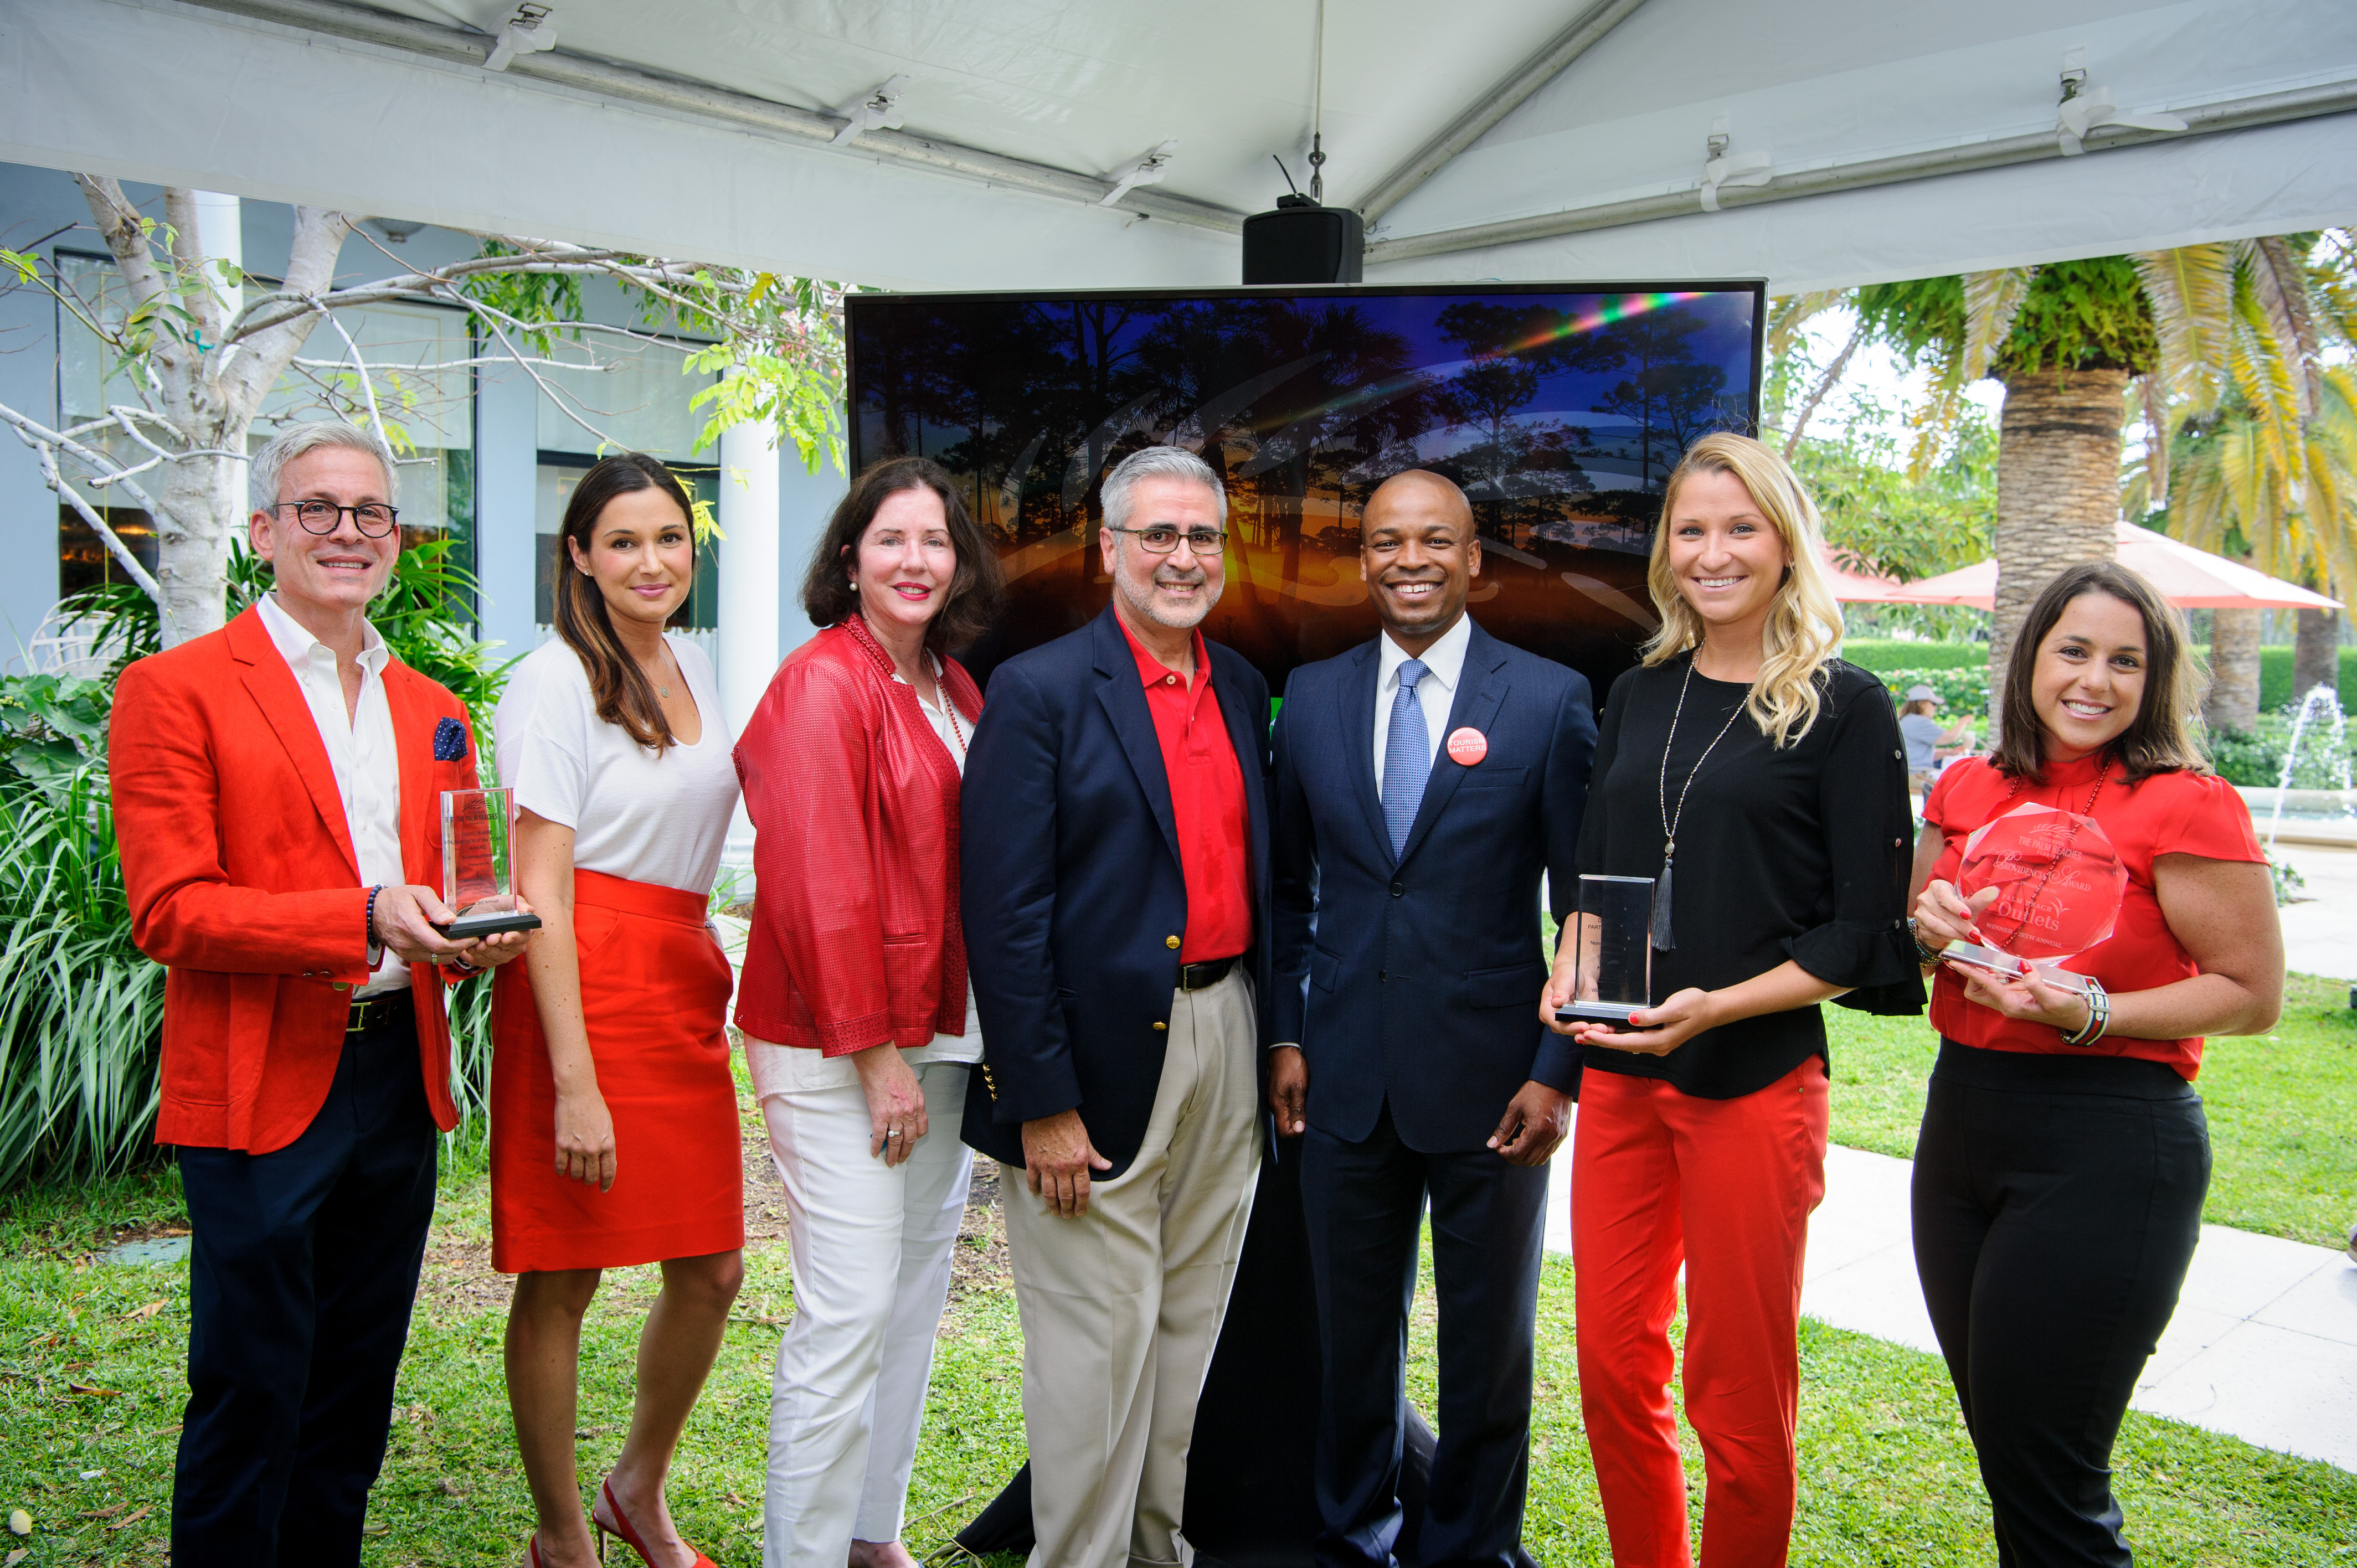 Left to right: Eau Palm Beach Resort &amp;amp; Spa Director of Public Relations Nick Gold, Eau Palm Beach Resort &amp;amp; Spa Director of Marketing Christine Davis, Manatee Lagoon Manager Sarah Marmion, Discover the Palm Beaches CEO Jorge Pesquera, Palm Beach County Mayor Mack Bernard, Manatee Lagoon Communication Specialist Brittany Balcer, and Palm Beach Outlets Marketing Director Pamela Rada.